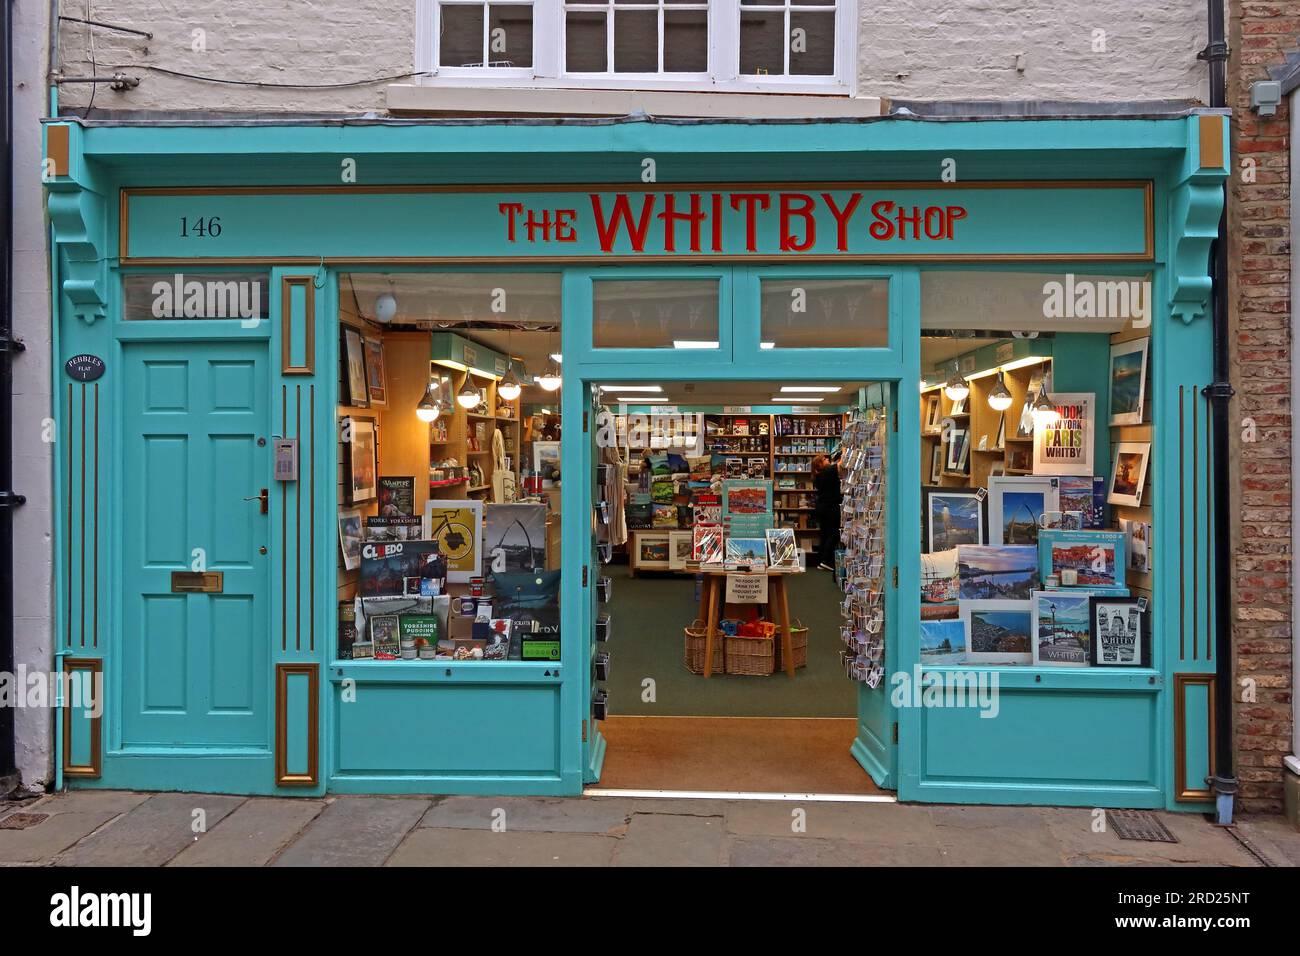 Whitby tourist shops bookstore, The Whitby Shop, 146 Church St, Whitby, North Yorkshire, Yorkshire, England, UK,  YO22 4DE Stock Photo